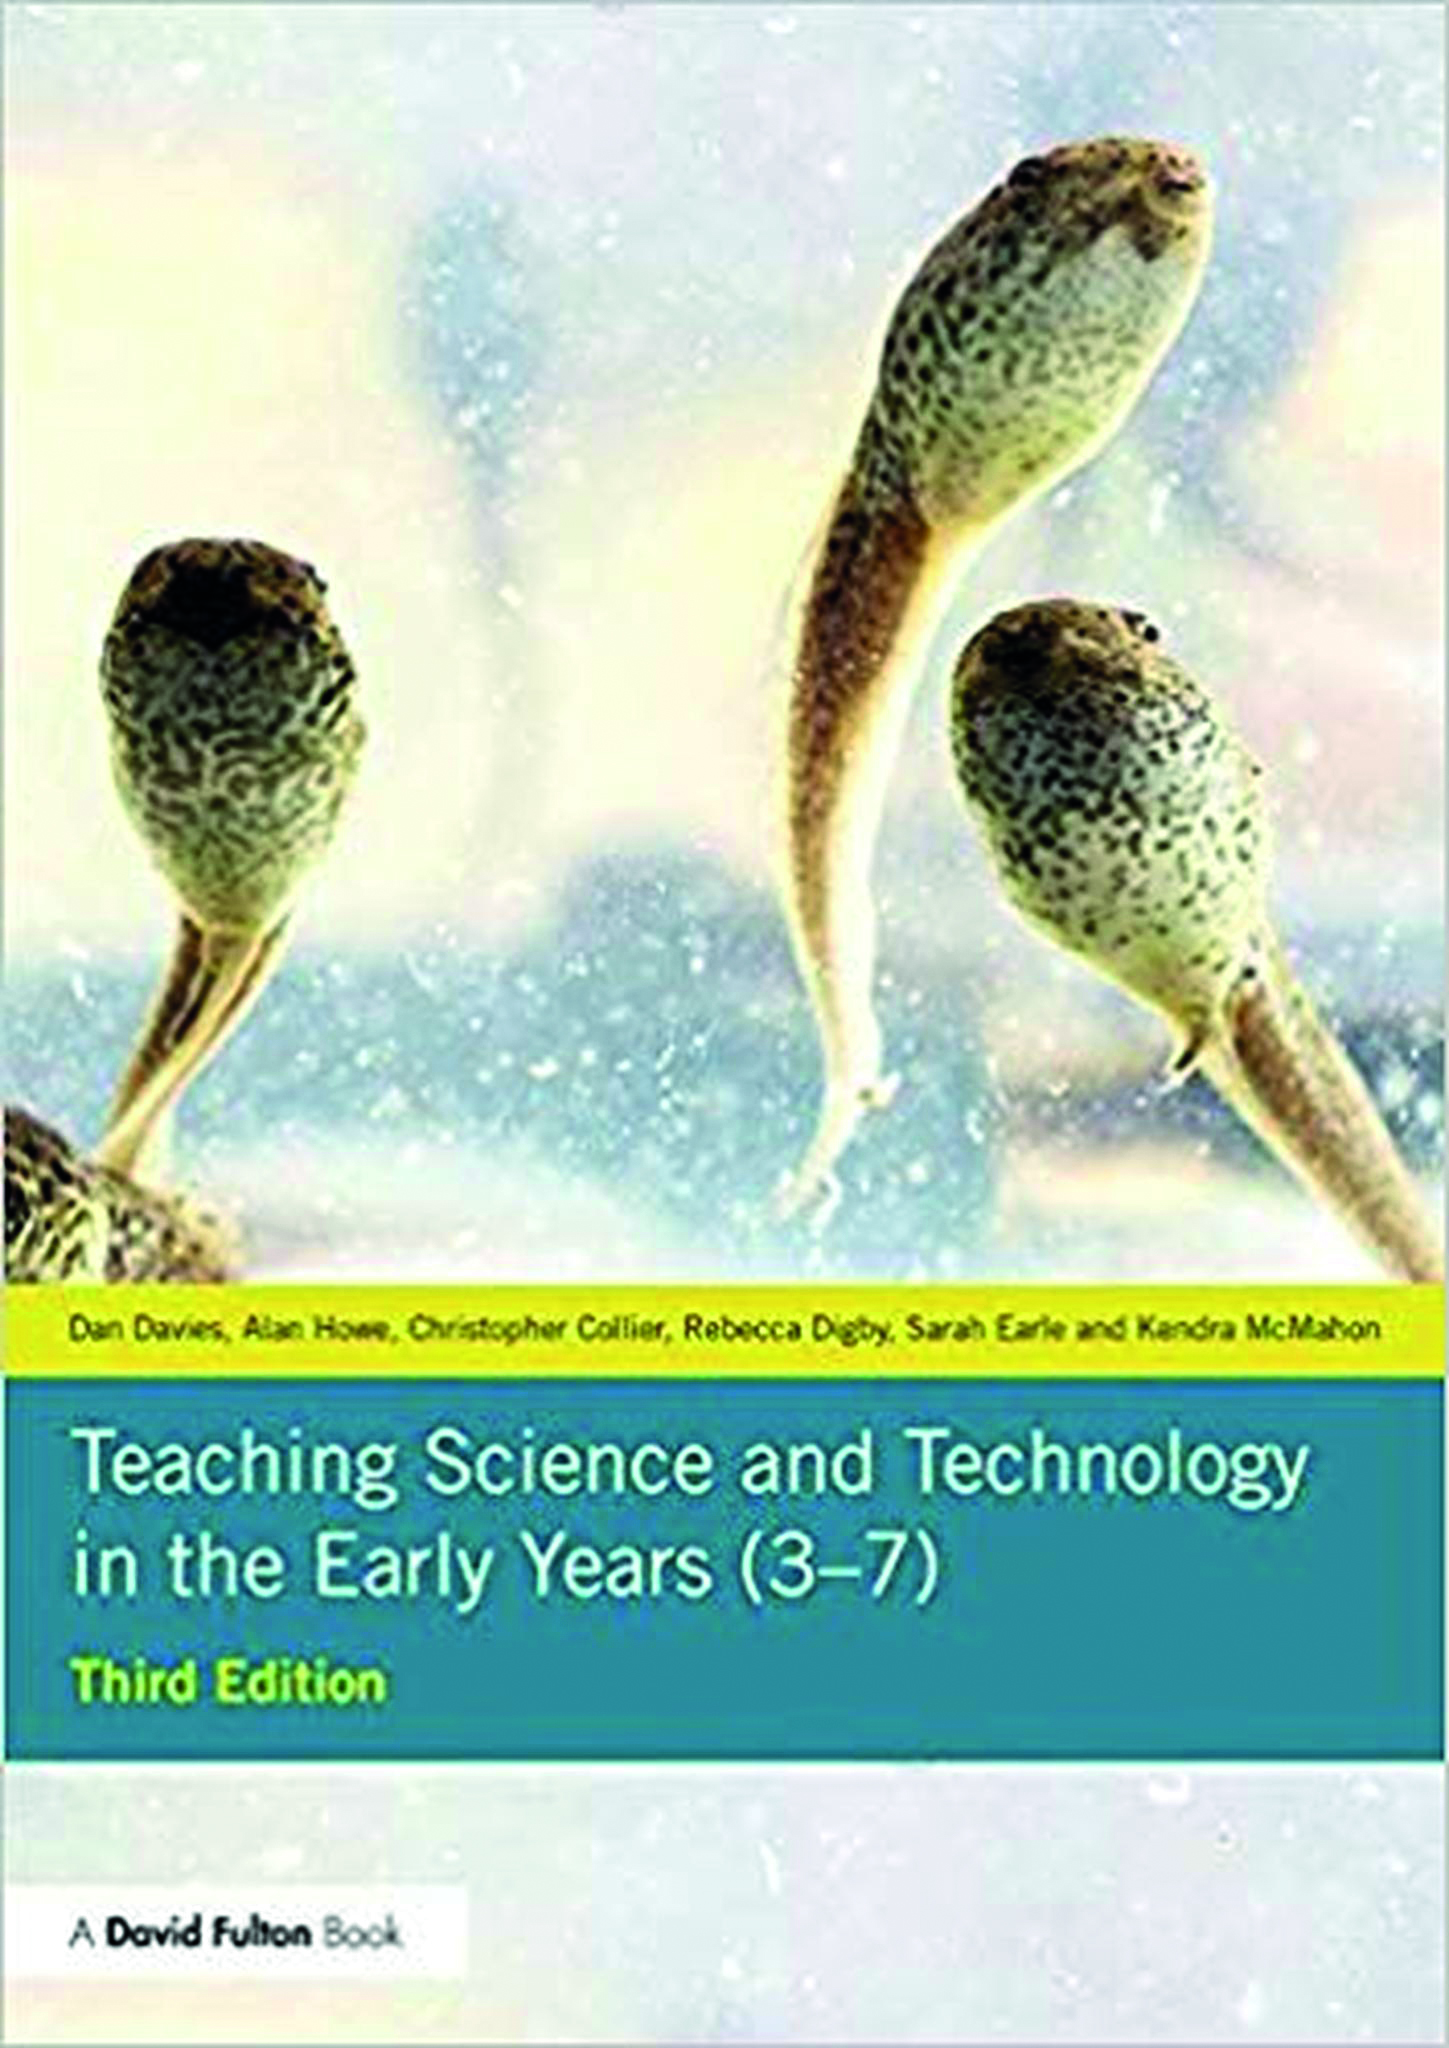 teaching_science_and_technology_in_the_early_years_37__94233-1560742764-1.jpg